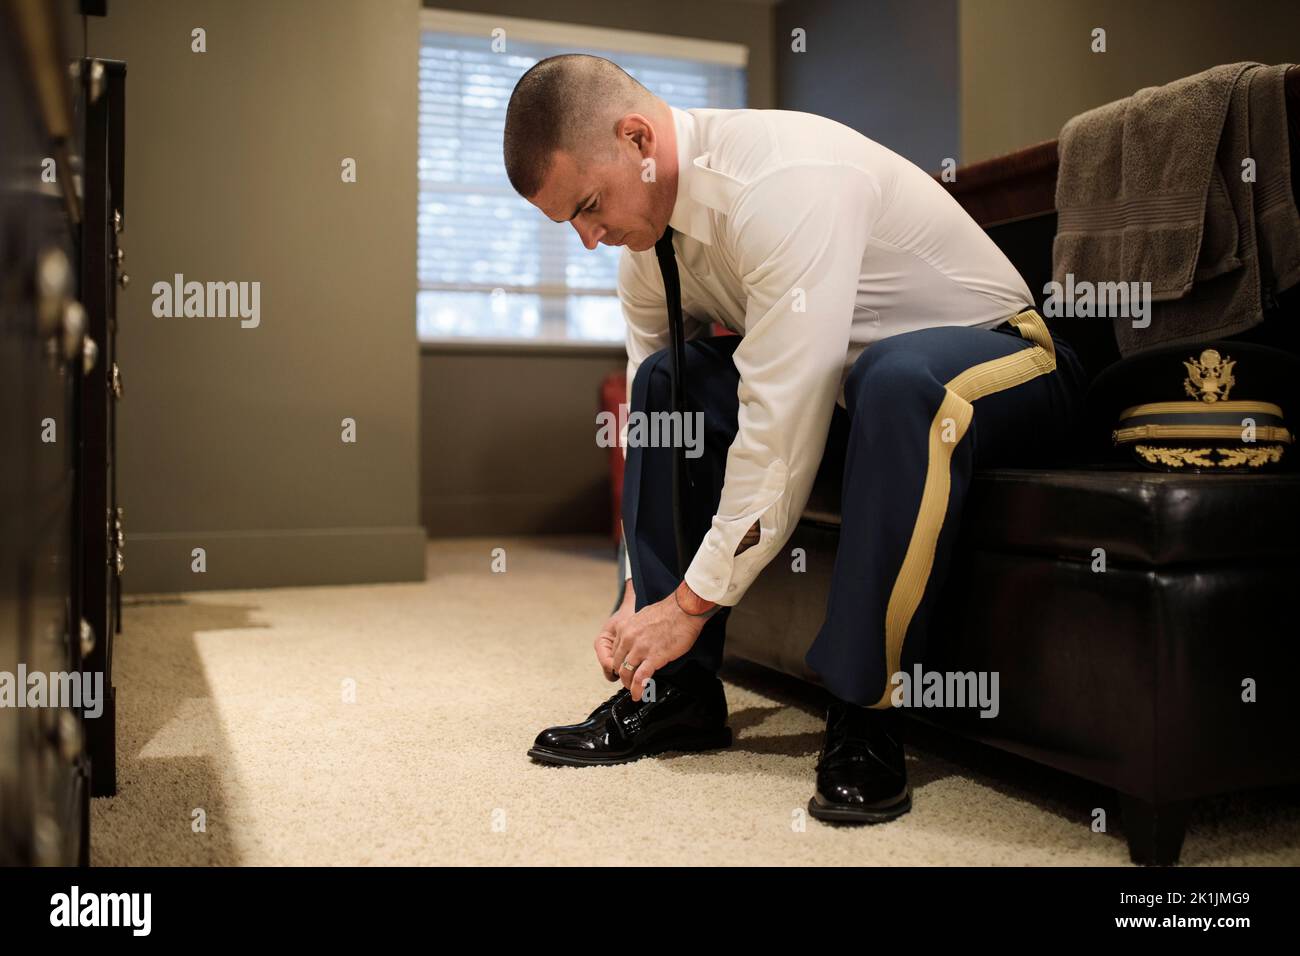 Male soldier putting on military dress uniform tying shoe in bedroom Stock Photo